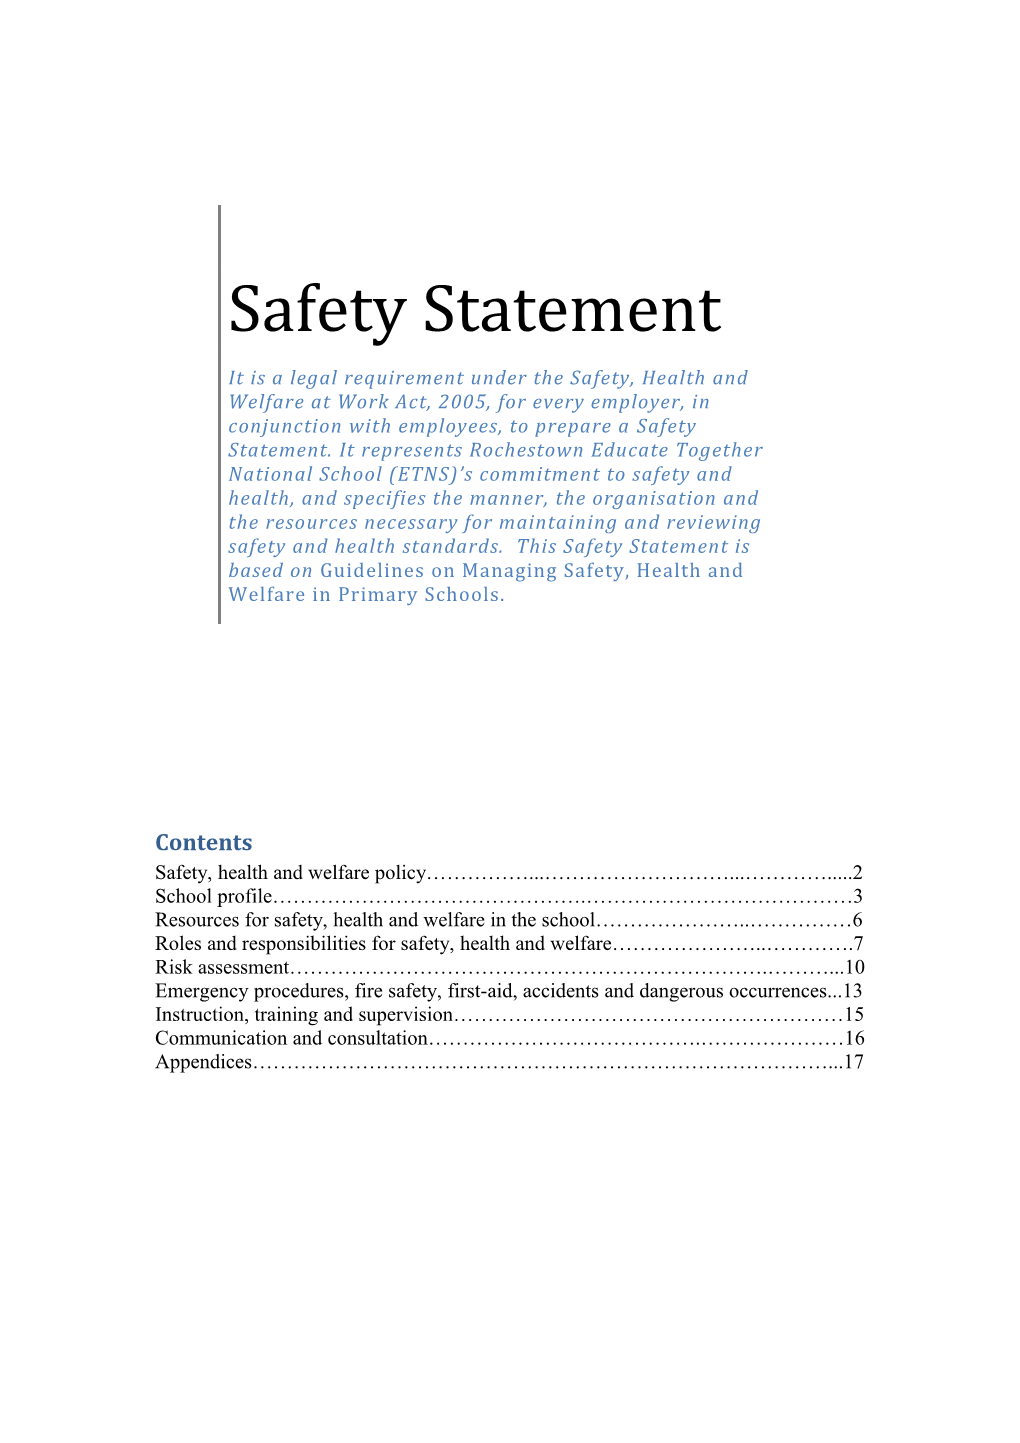 Safety, Health and Welfare Policy 2